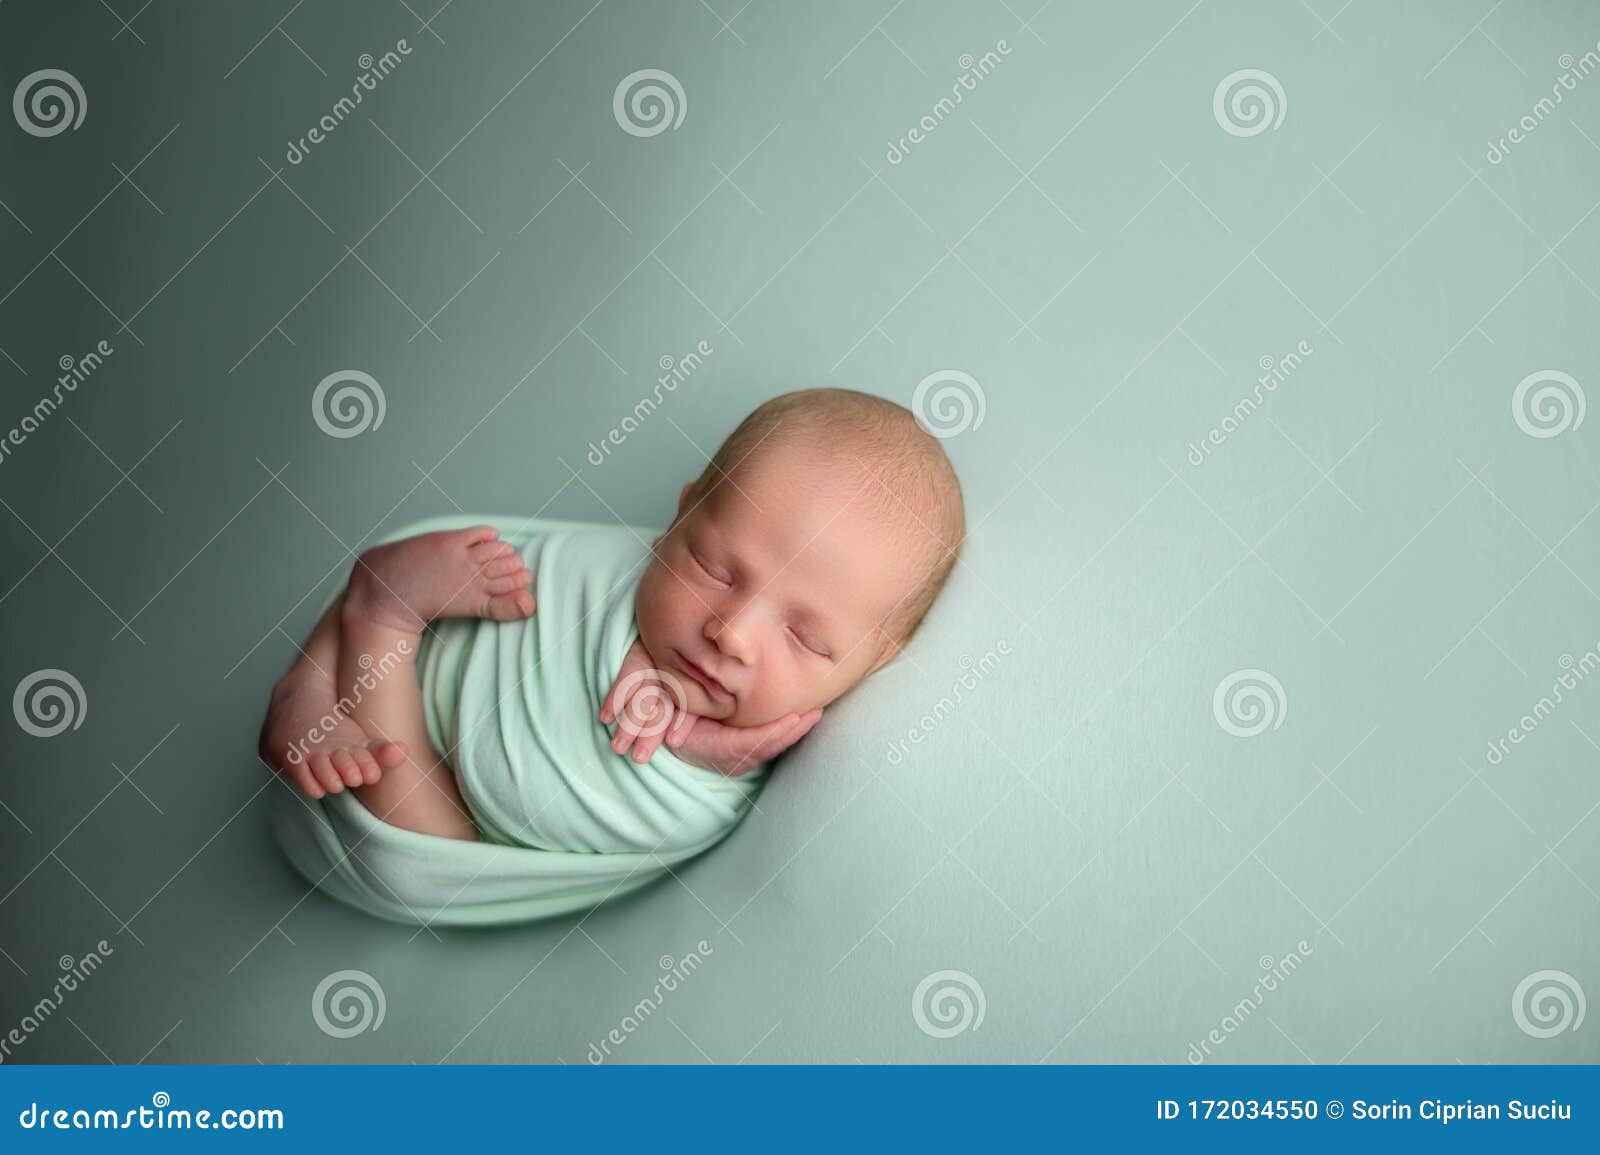 lovely newborn baby boy sleaping confort pose